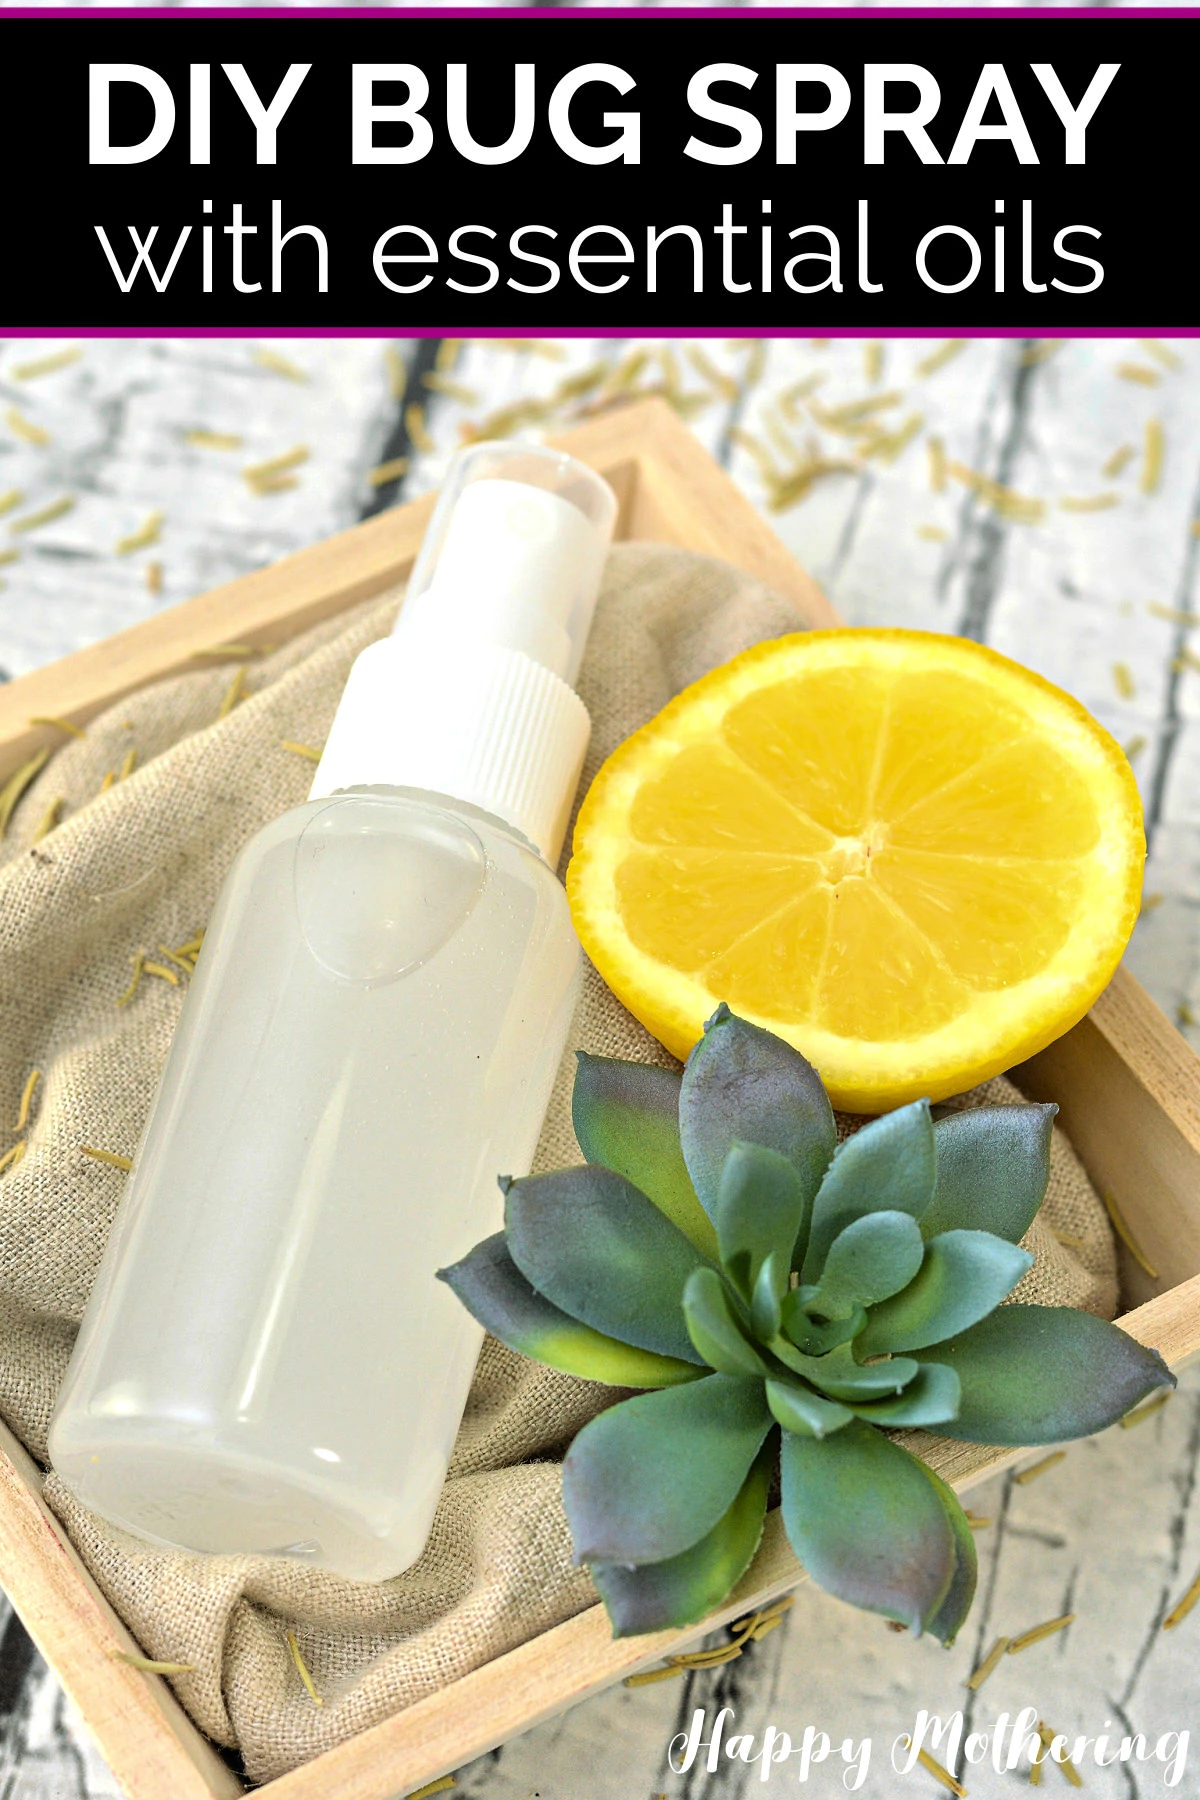 Spray bottle of homemade essential oil bug spray in pretty wood crate with lemon slice and green succulent plant